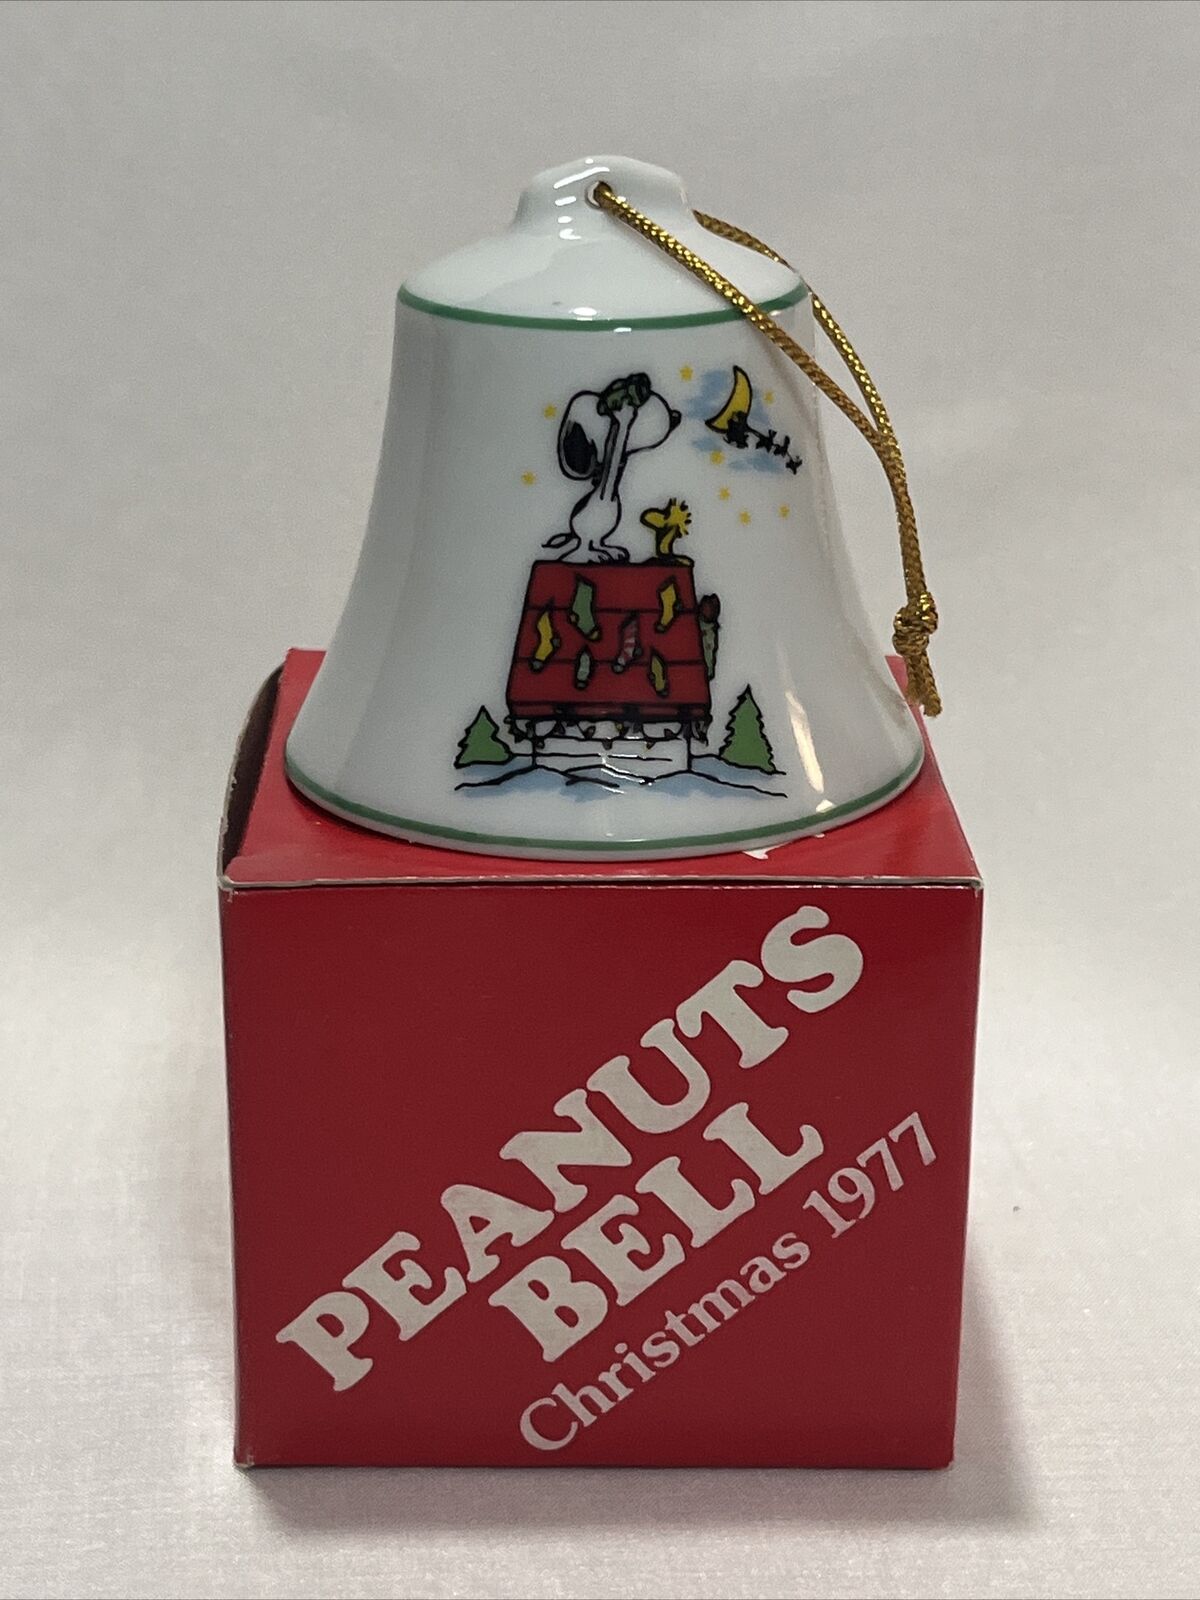 Peanuts Bell Christmas 1977 - Snoopy & Woodstock On His Doghouse - No. 1873